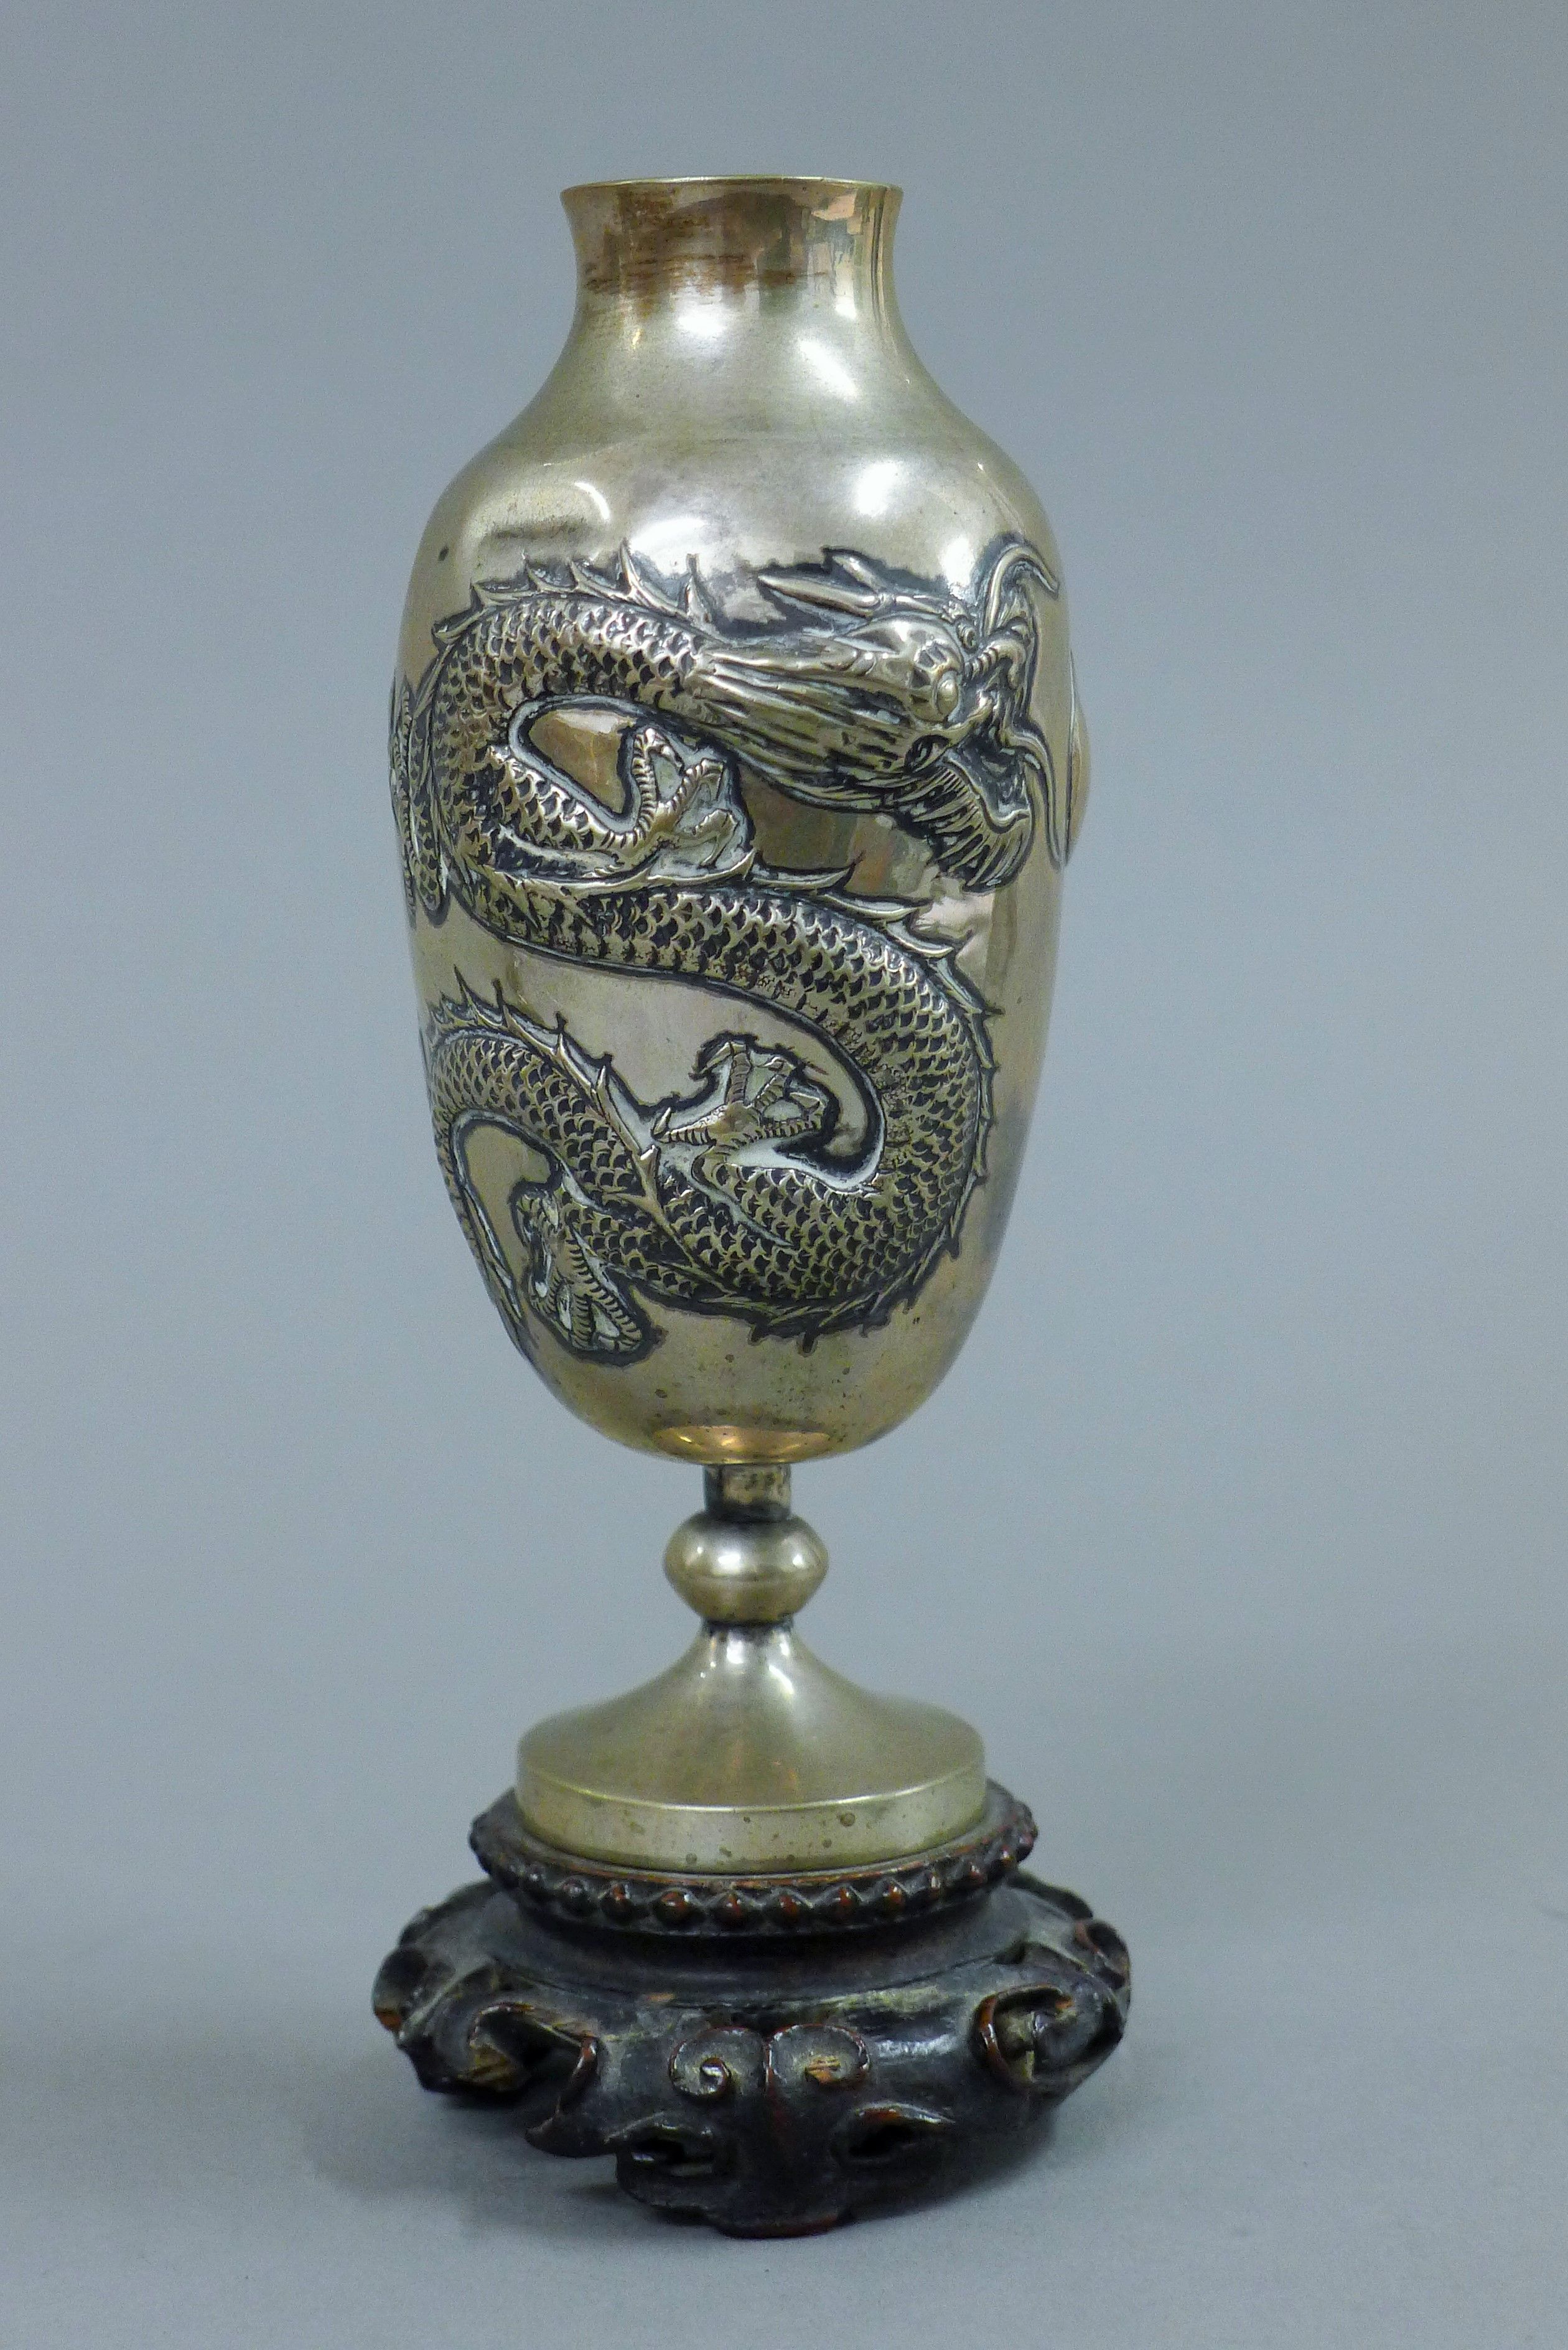 A pair of small Chinese silver vases, each mounted on a carved wooden stand. 14.5 cm high overall. - Image 3 of 5